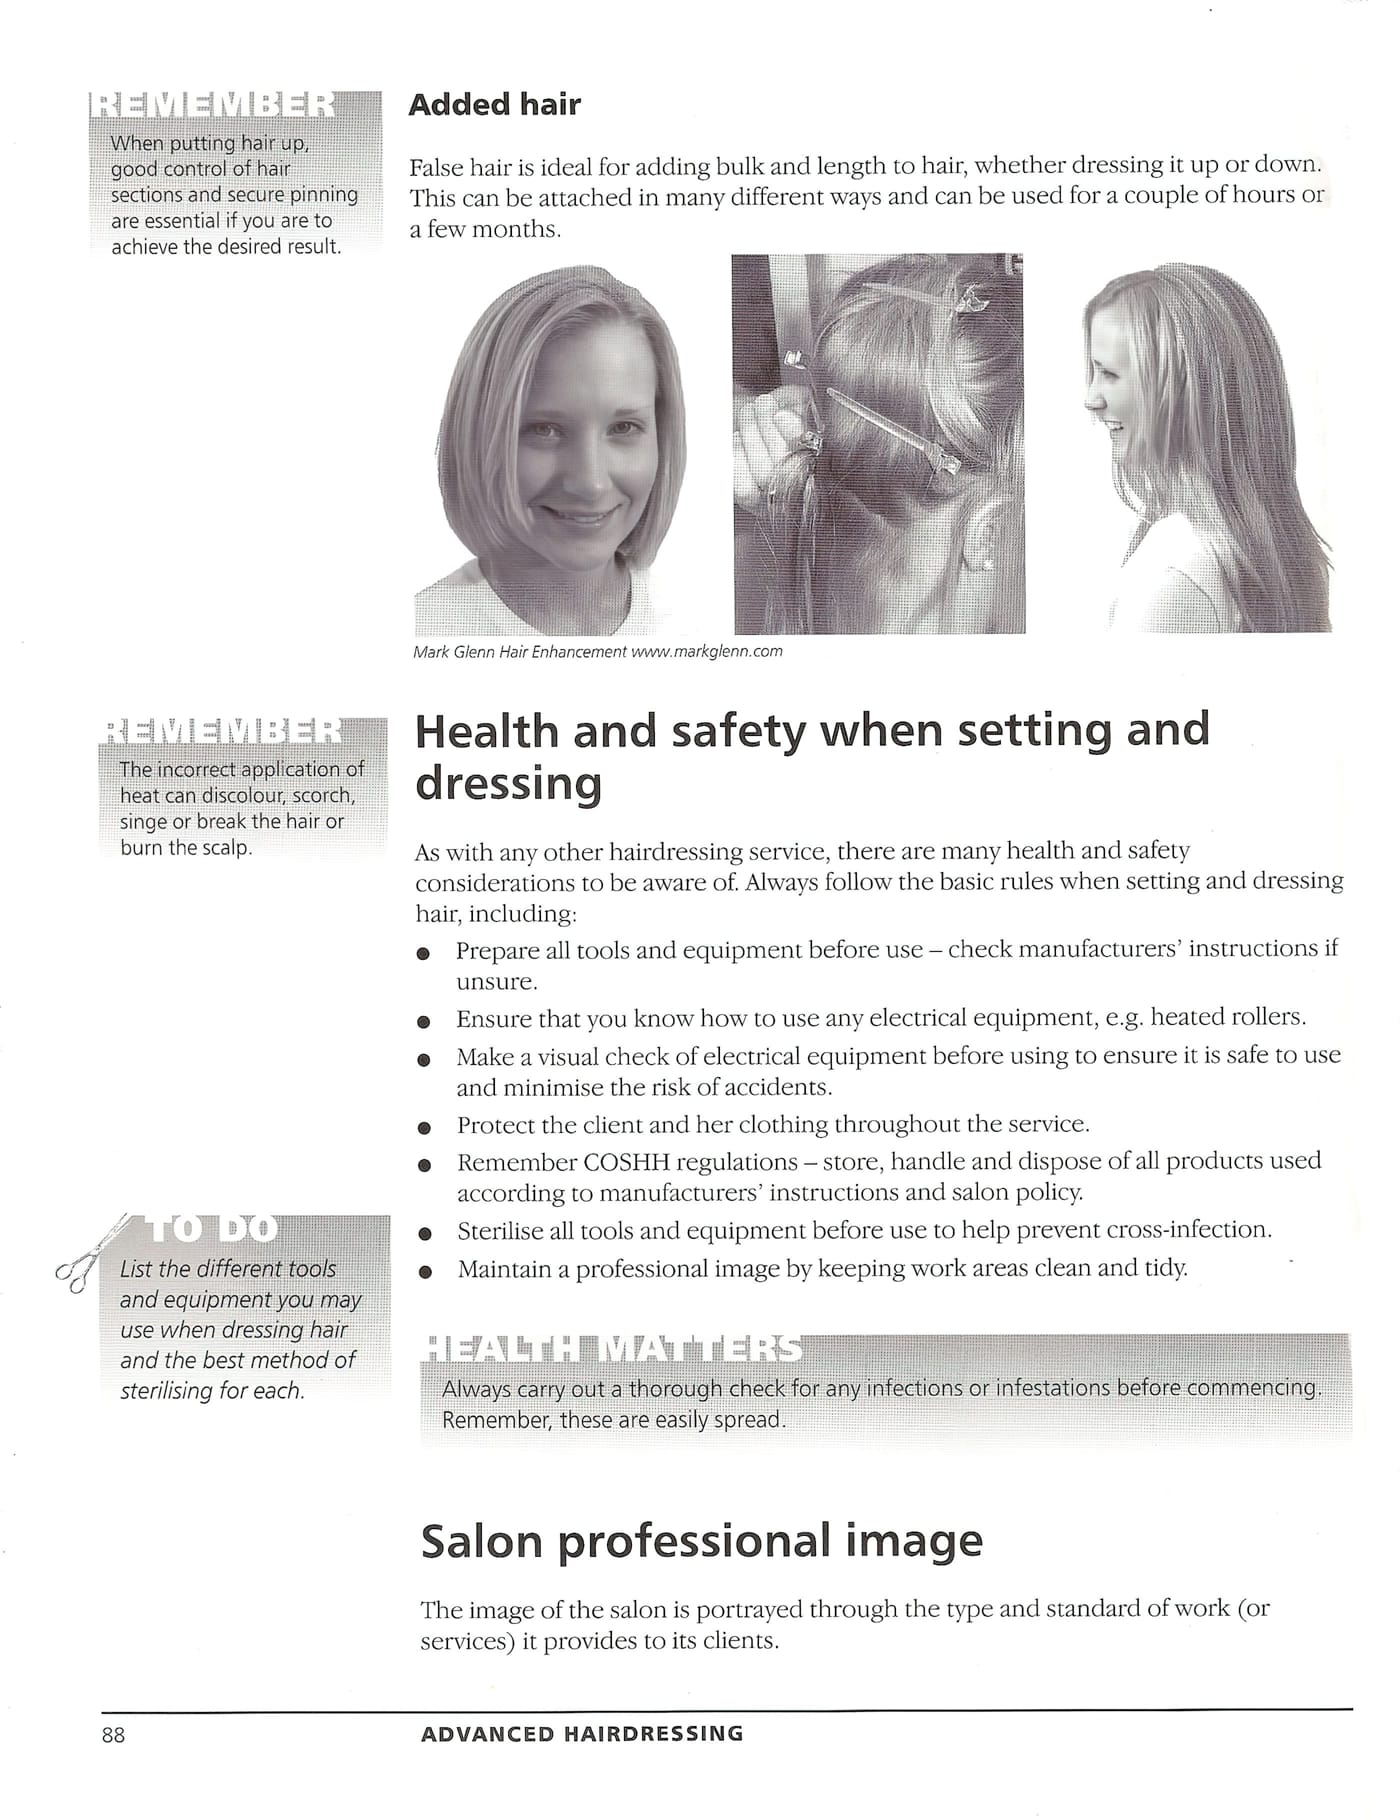 Mark Glenn hair extensions in leading industry course book